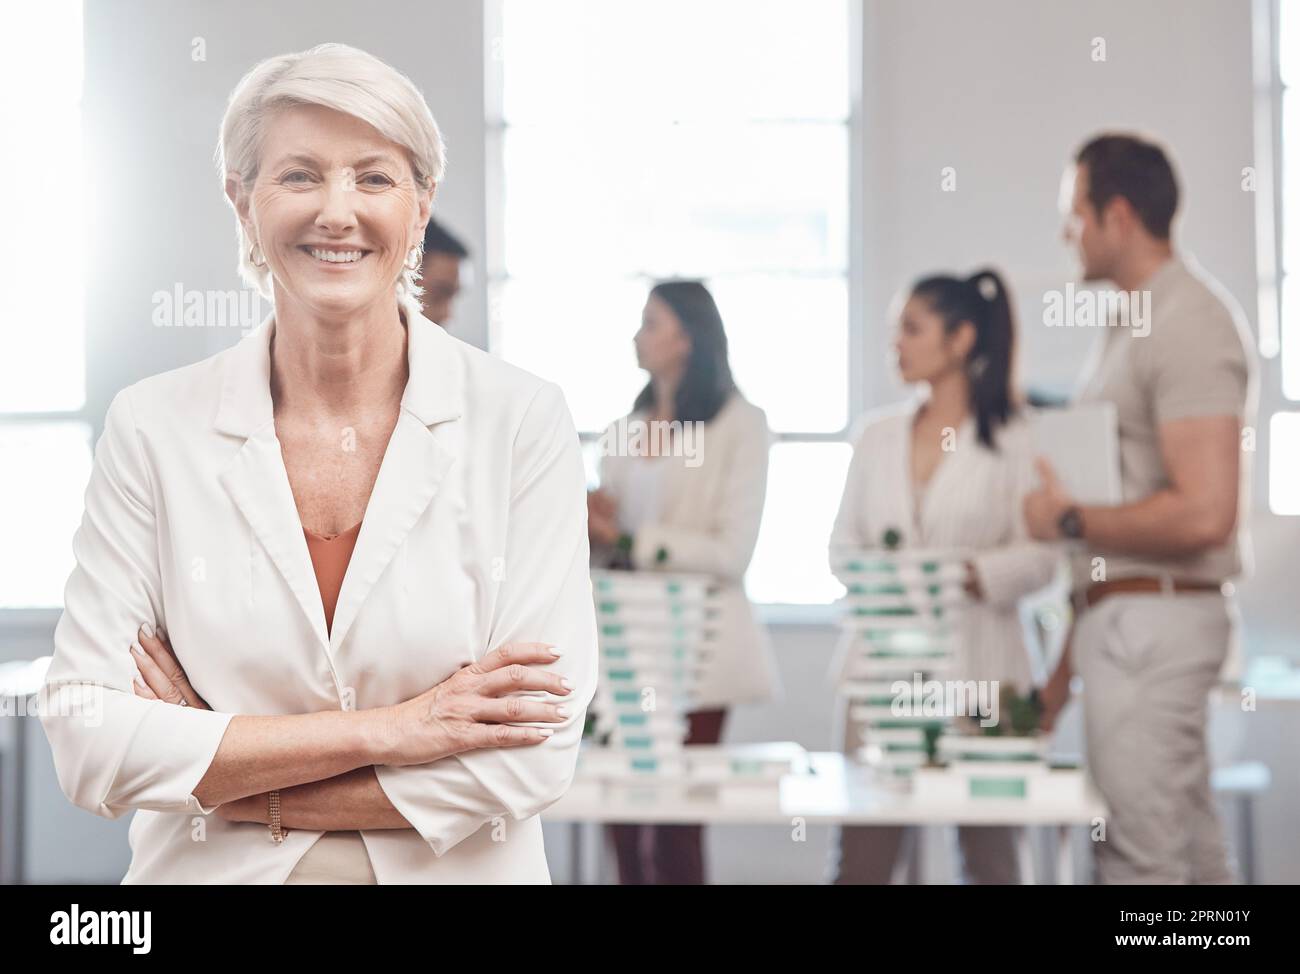 Engineer, architect or portrait of woman worker with smile in creative architecture training, business meeting and planning in workshop. Support, collaboration and teamwork at a coaching tradeshow. Stock Photo